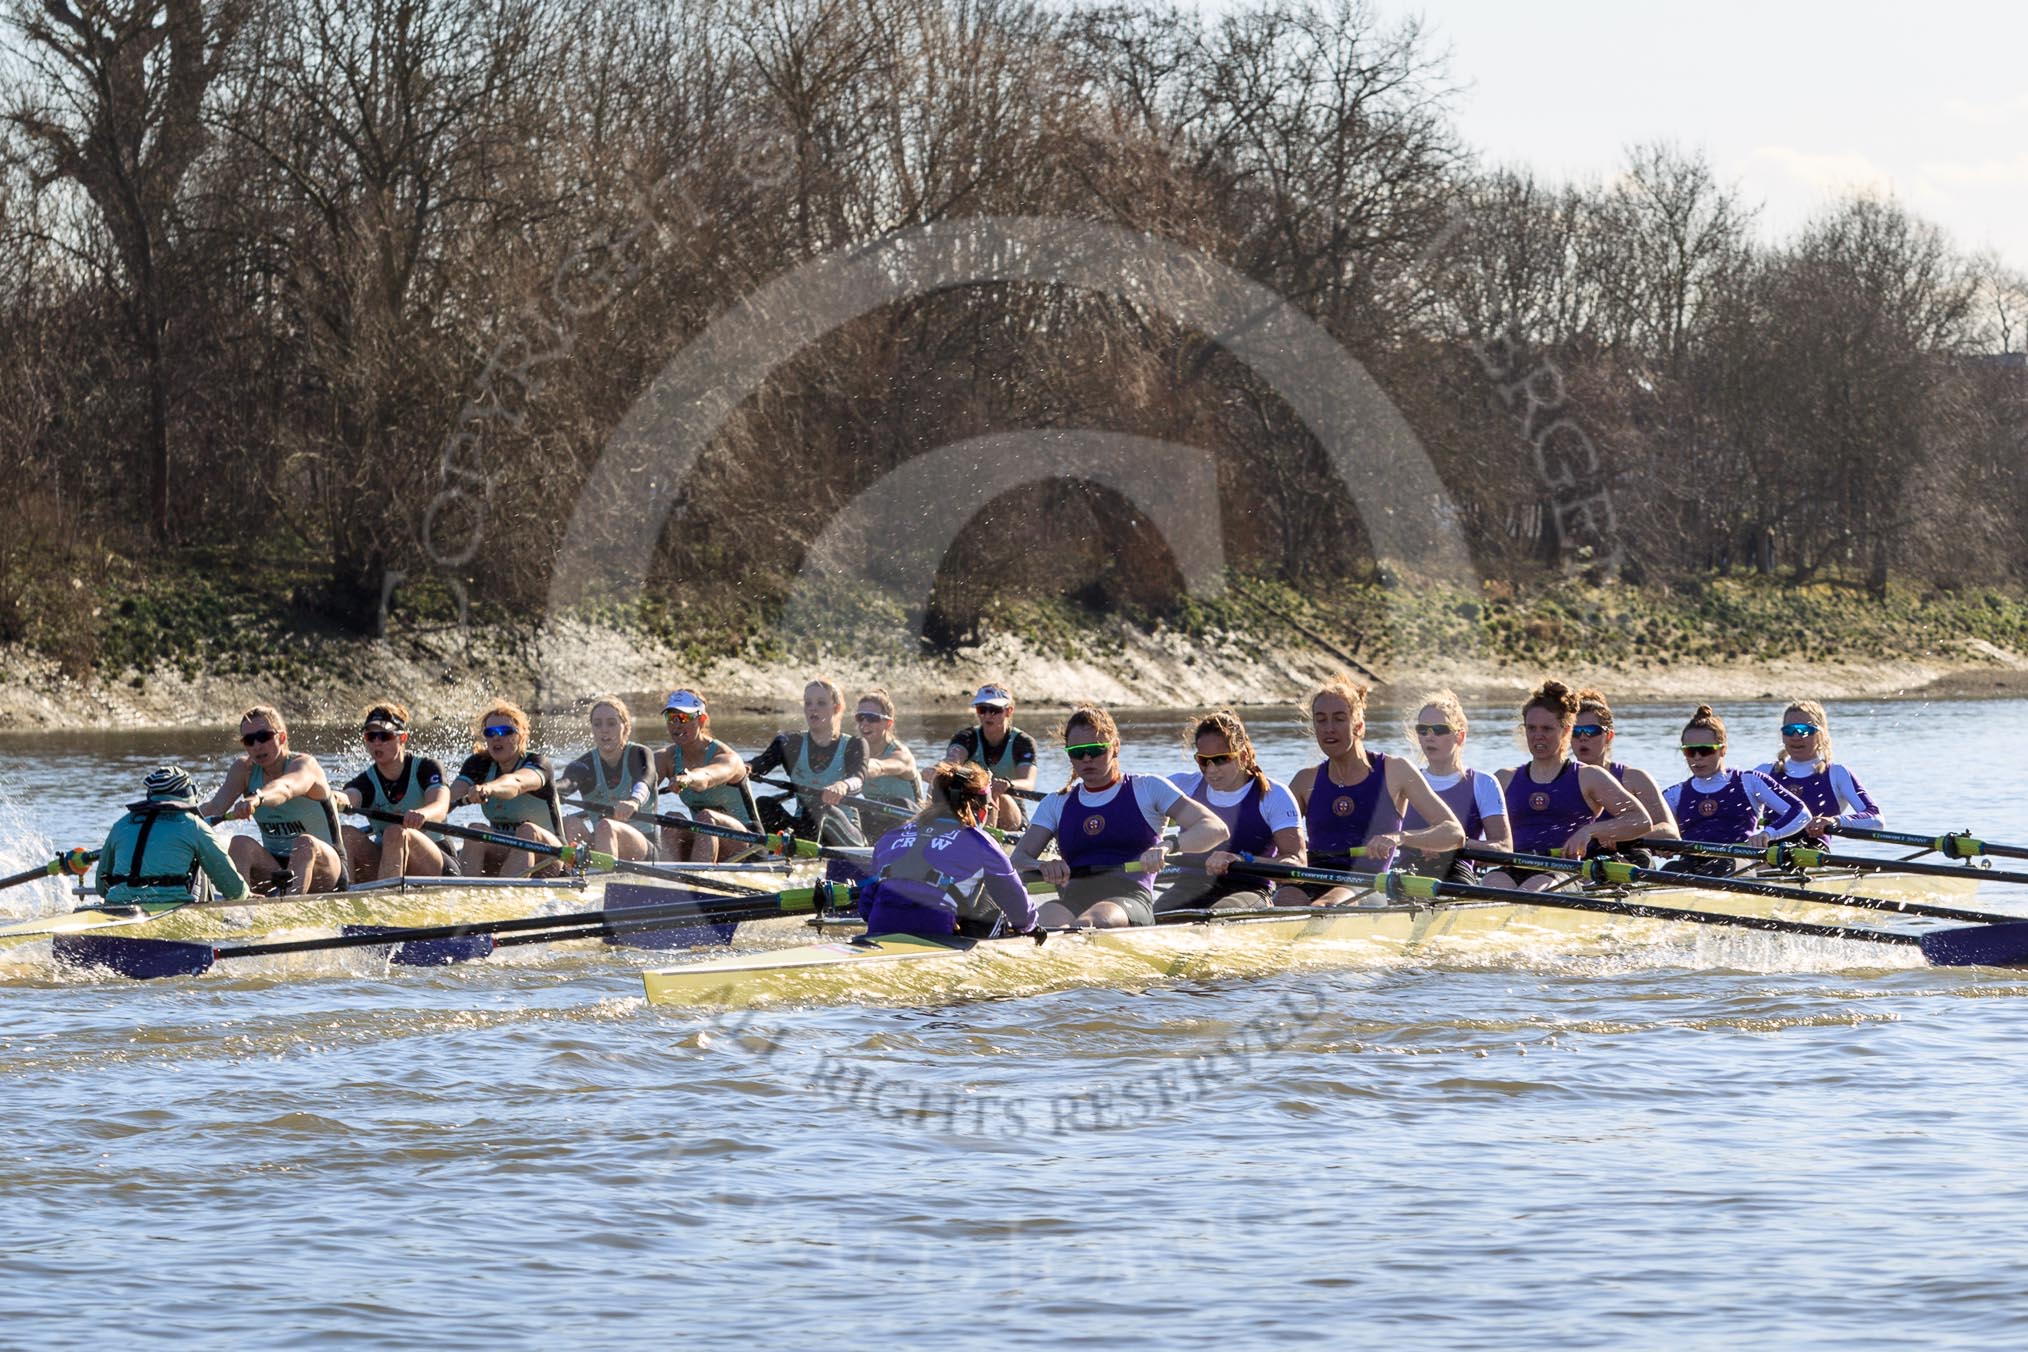 The Women's Boat Race season 2018 - fixture CUWBC vs. ULBC: OUWBC and ULBC during the early phase of the second race.
River Thames between Putney Bridge and Mortlake,
London SW15,

United Kingdom,
on 17 February 2018 at 13:28, image #122